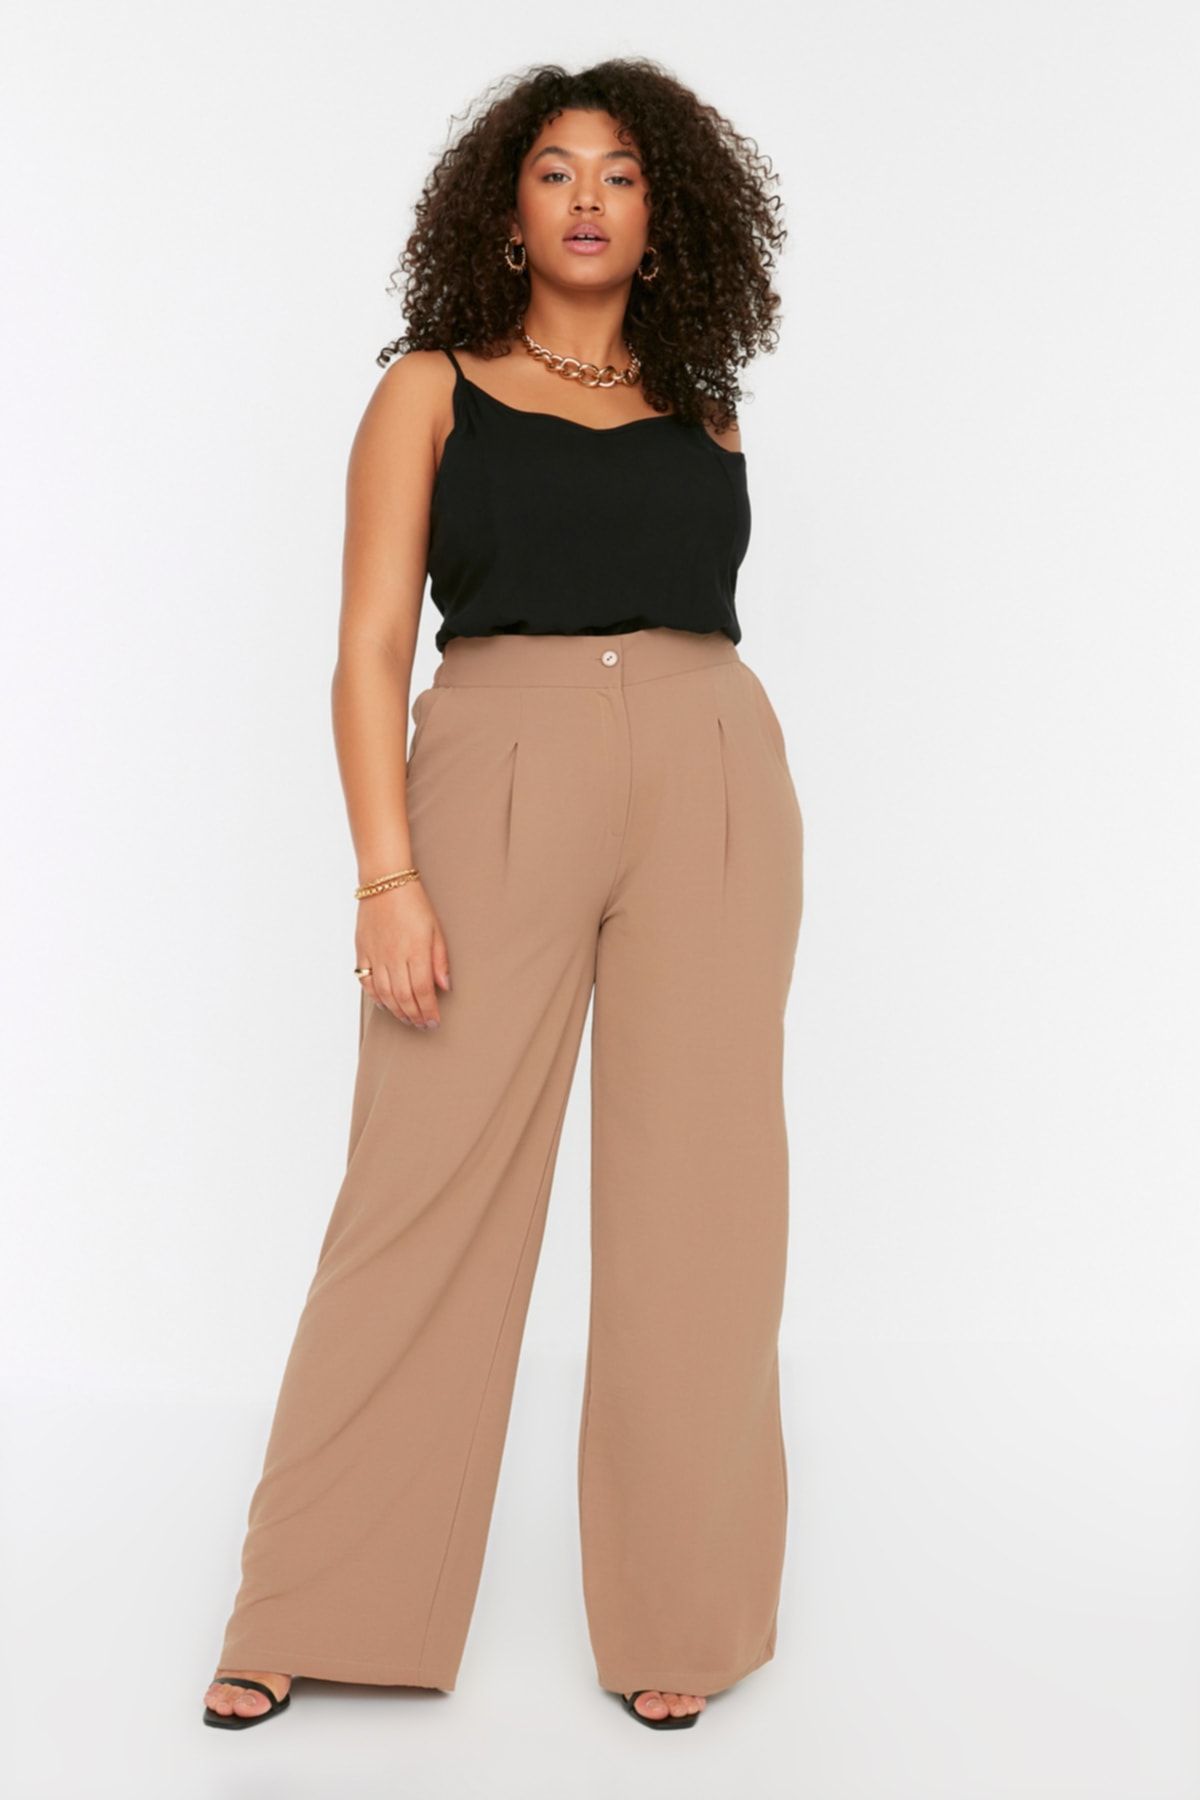 Kasbah Clothing  Plus Size Trousers and Robell Trouser  Kasbah Clothing